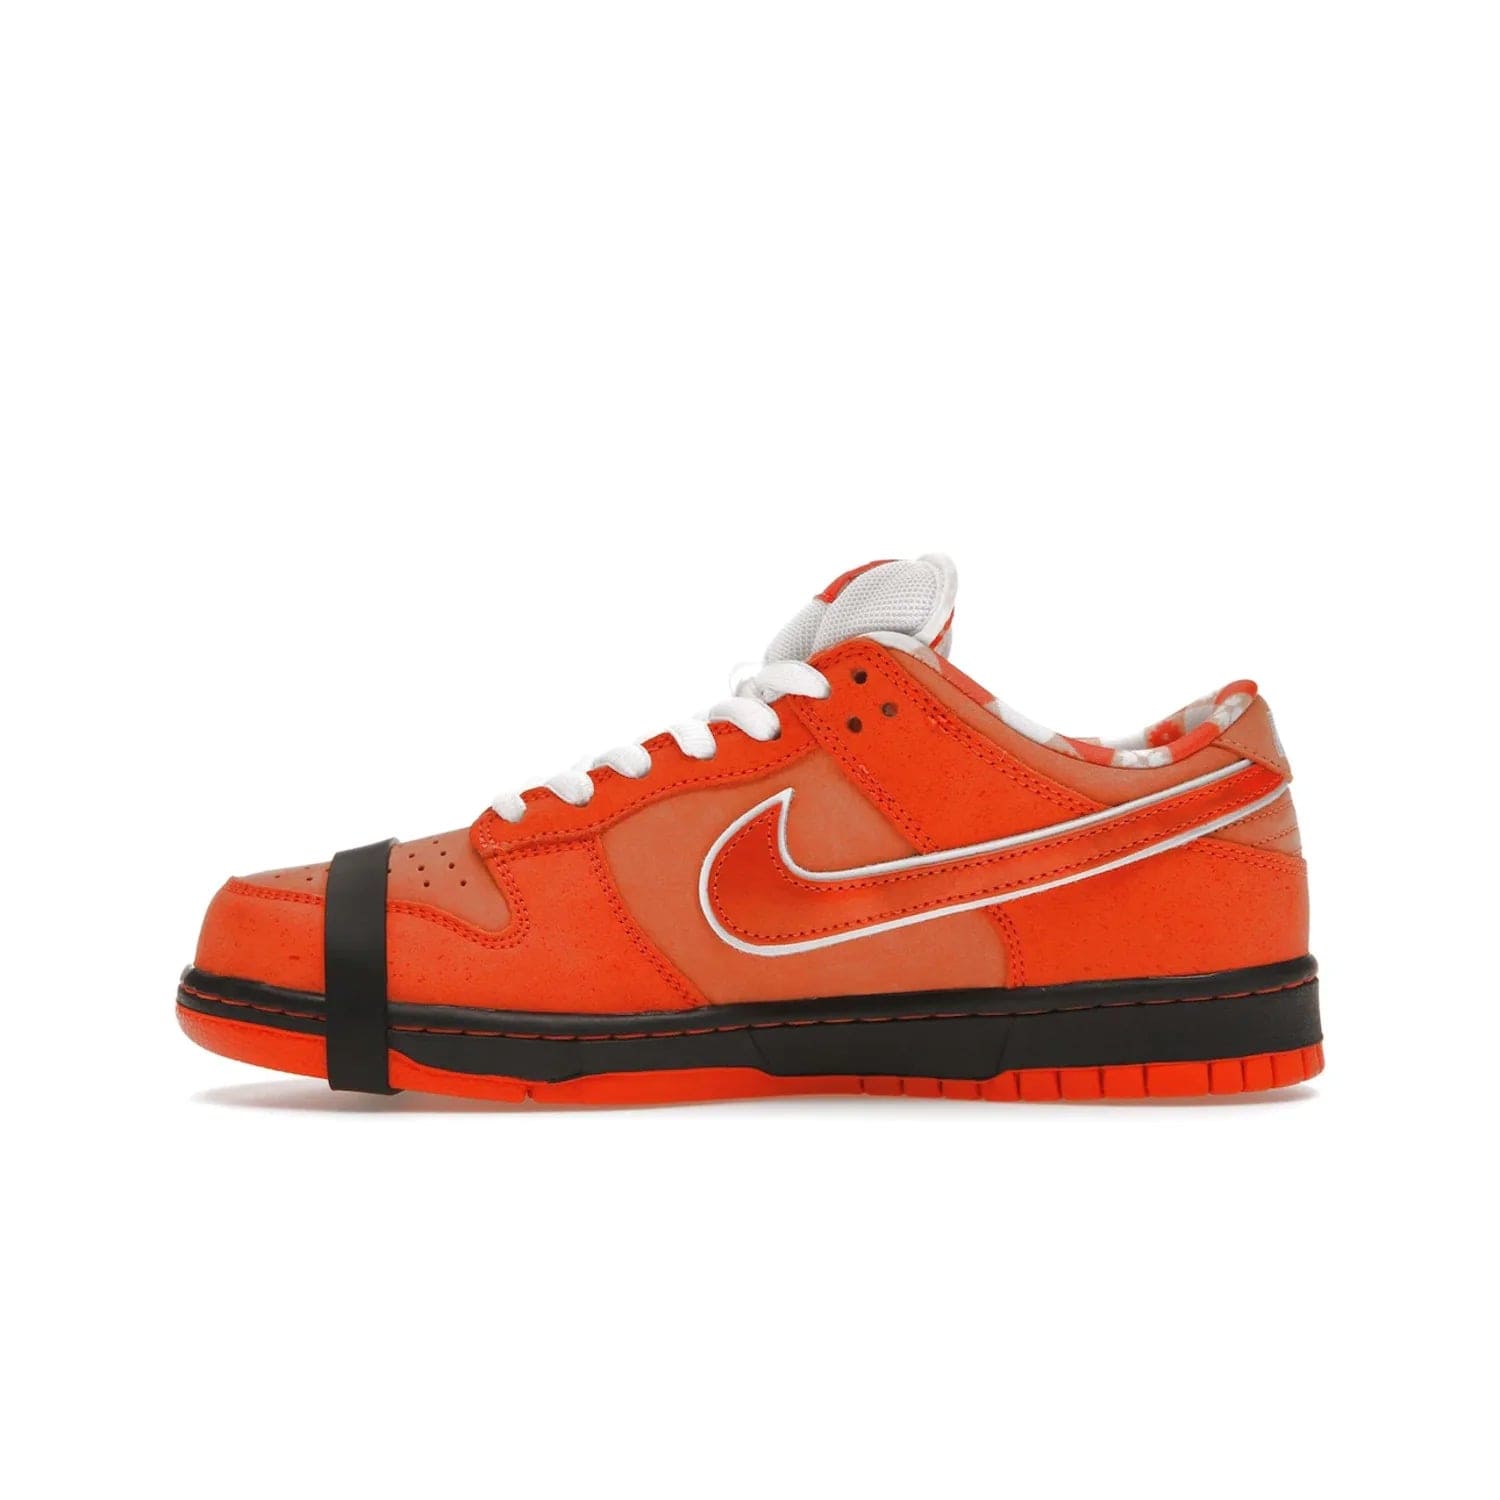 Nike SB Dunk Low Concepts Orange Lobster - Image 19 - Only at www.BallersClubKickz.com - Limited Nike SB Dunk Low Concepts Orange Lobster features premium nubuck upper with vibrant oranges for eye-catching colorblocked design. Signature Nike SB tag and bib-inspired interior for added texture. Outsole and cupsole provide extra reinforcement. Get it 12/20/2022.